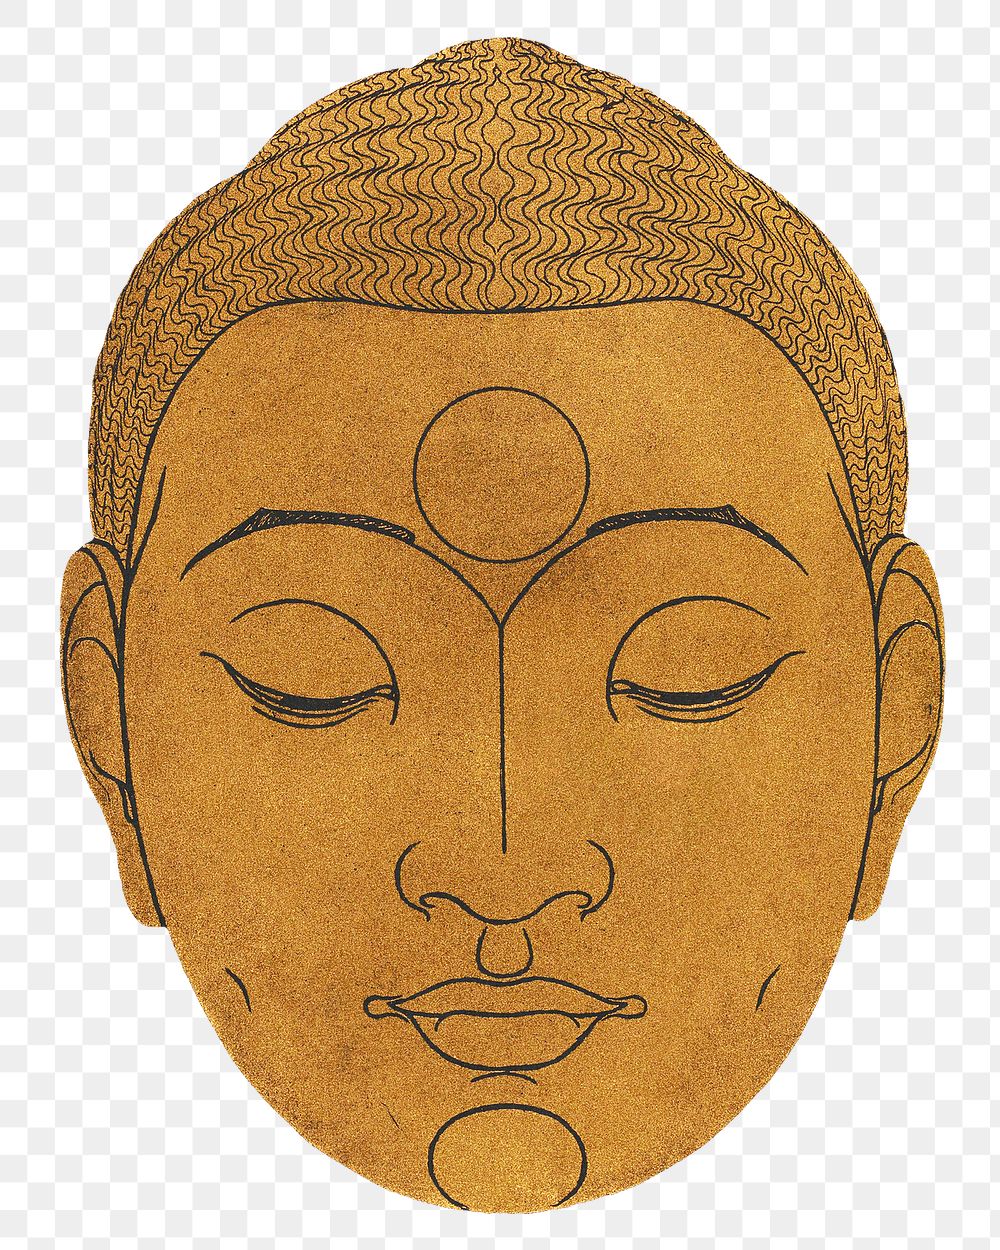 Buddha head png sticker, remixed from artworks by Reijer Stolk